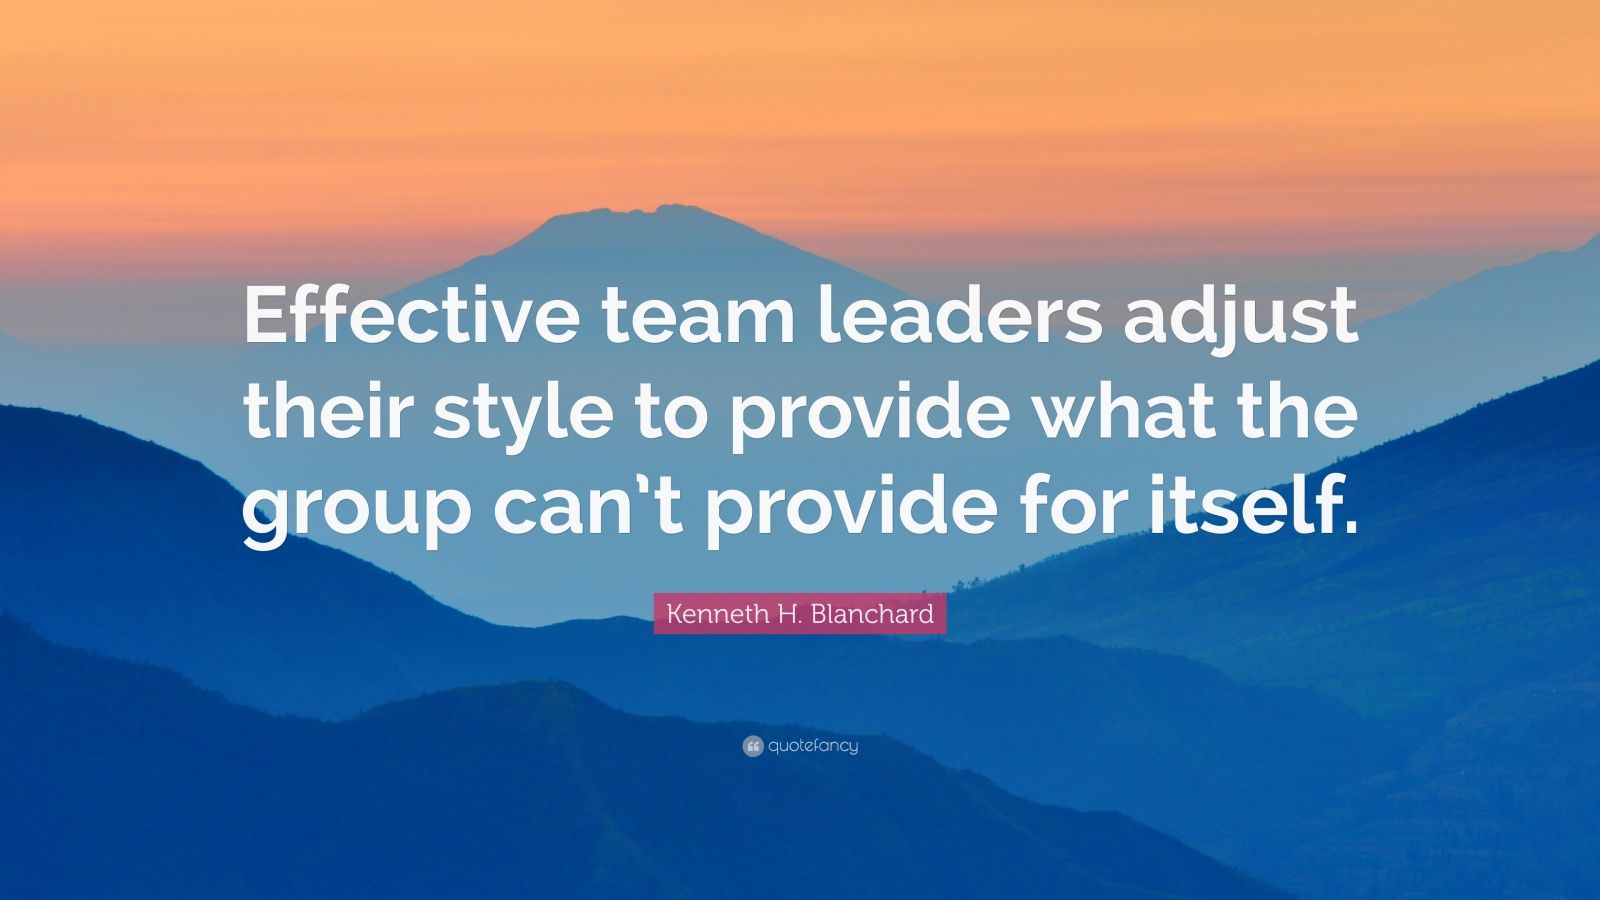 Kenneth H. Blanchard Quote: “Effective team leaders adjust their style ...